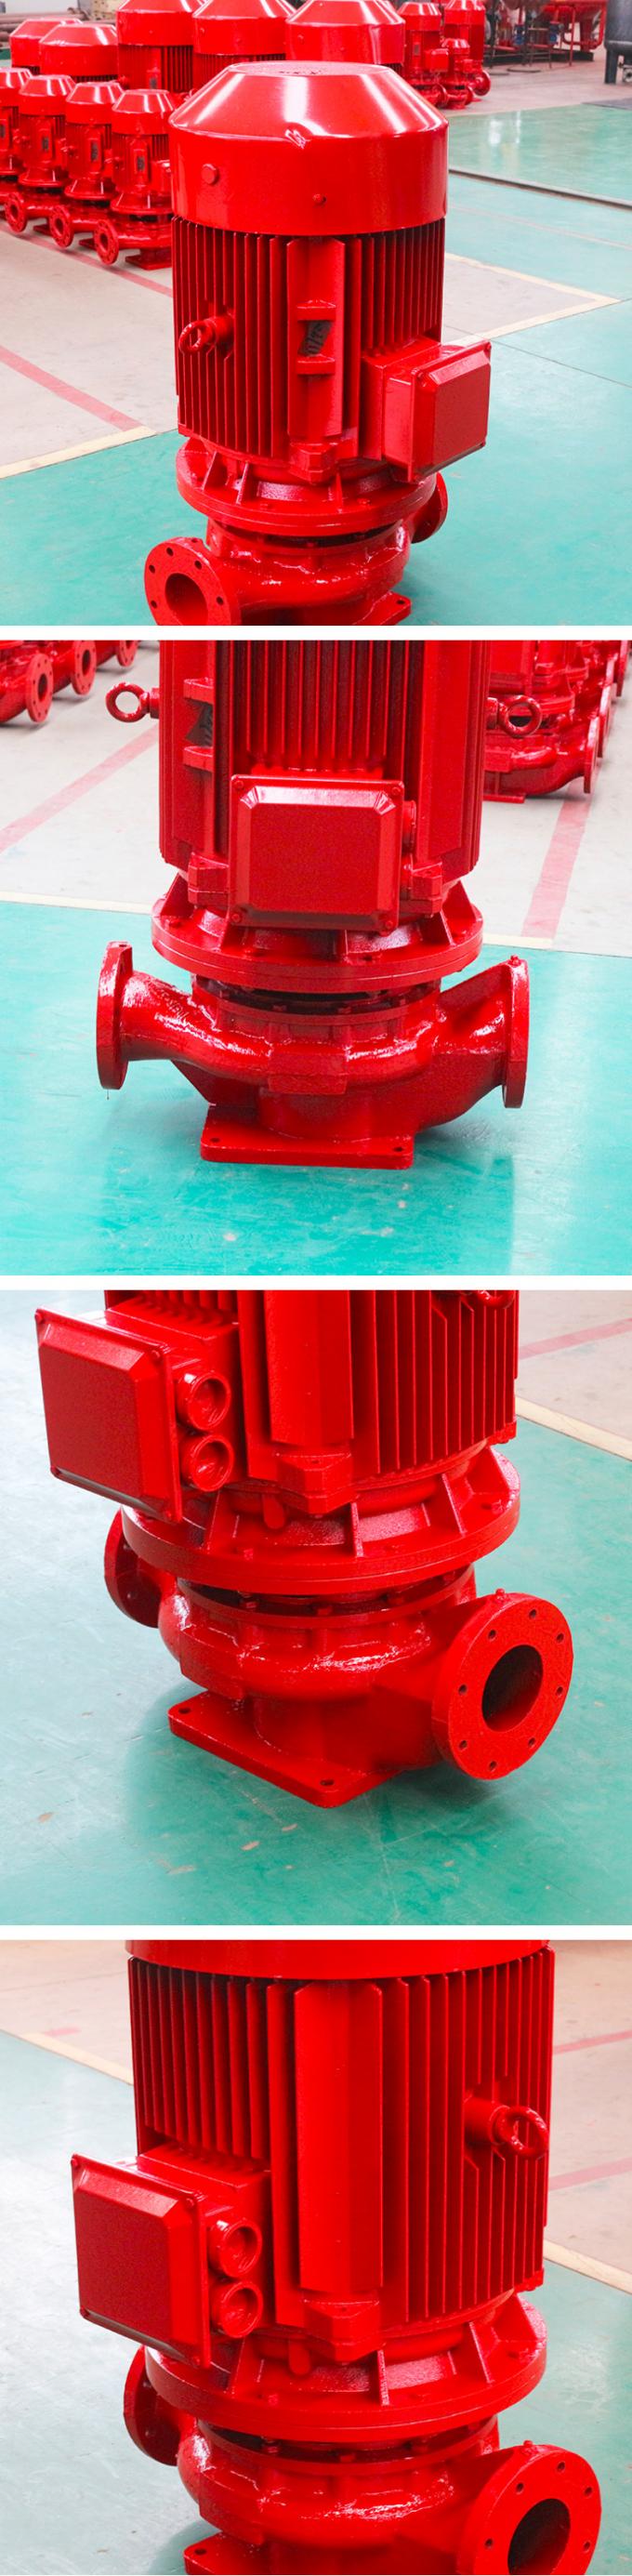 Vertical Motor Driven Water Pump , Single Stage Centrifugal Pump Inline 3 Inch